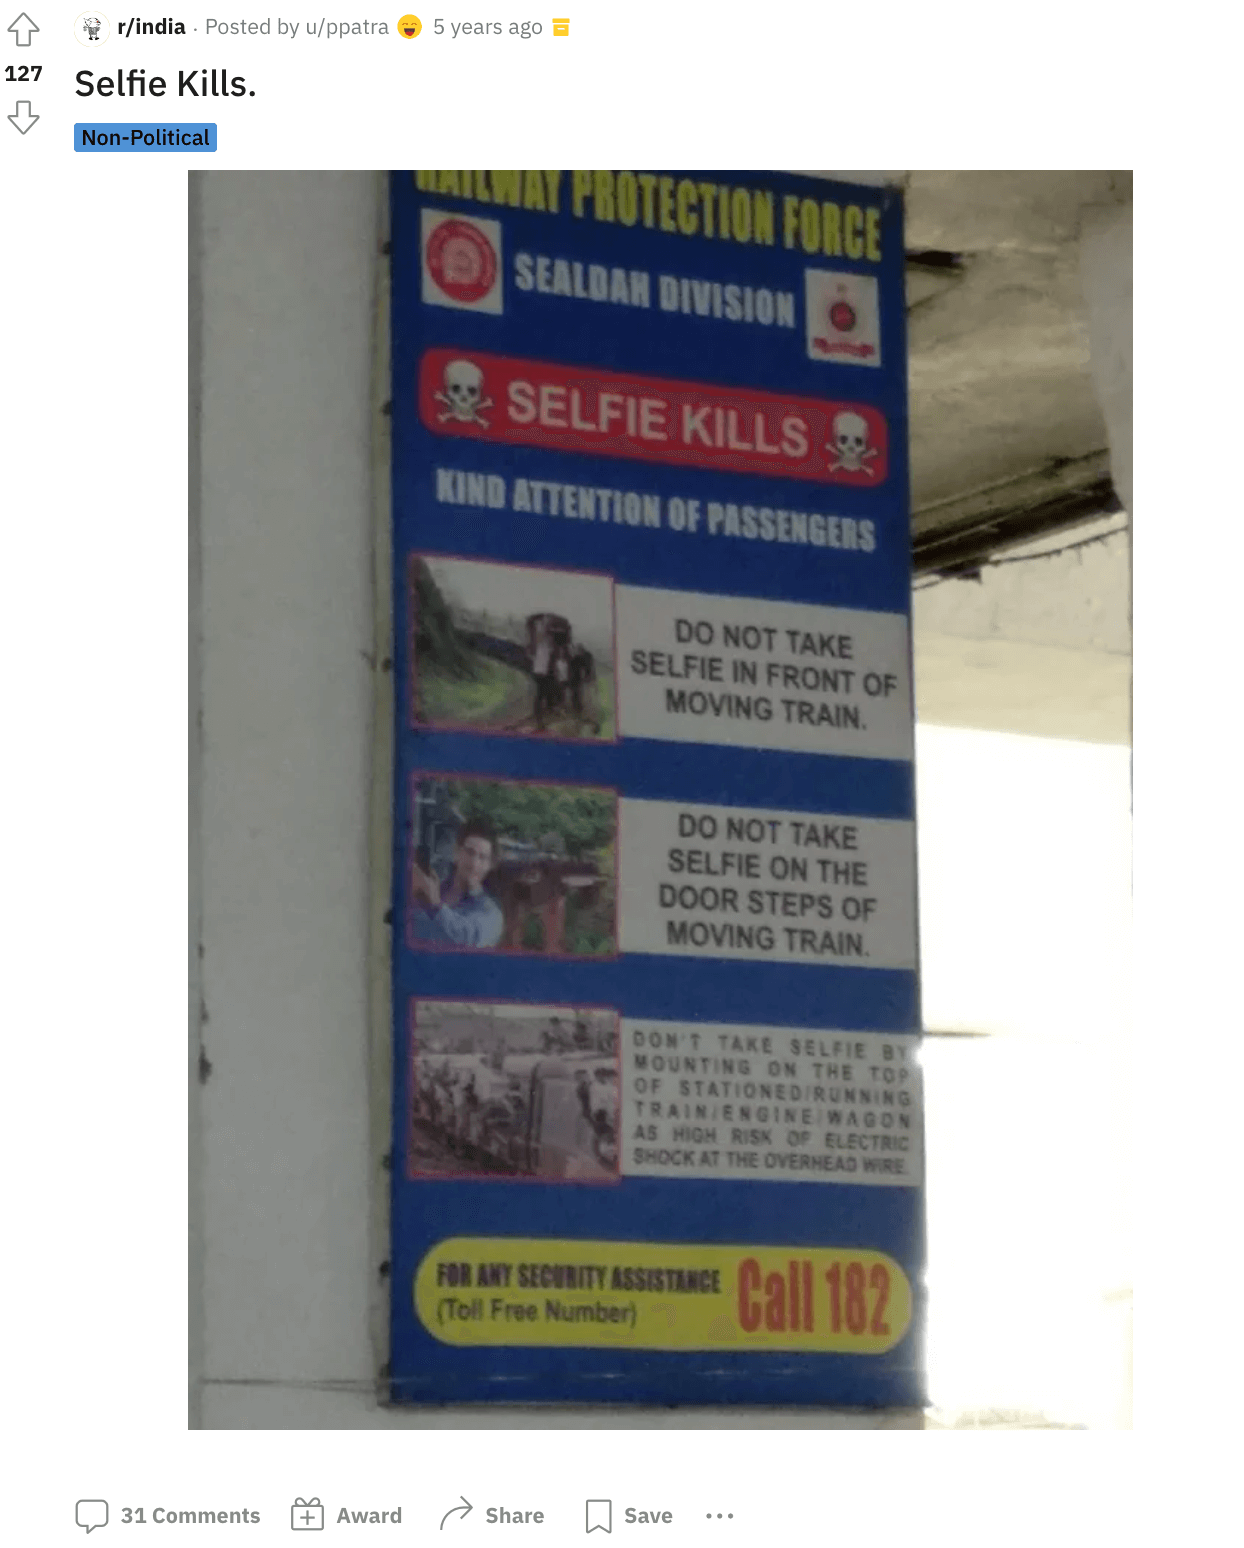 Killfies are a big problem in India